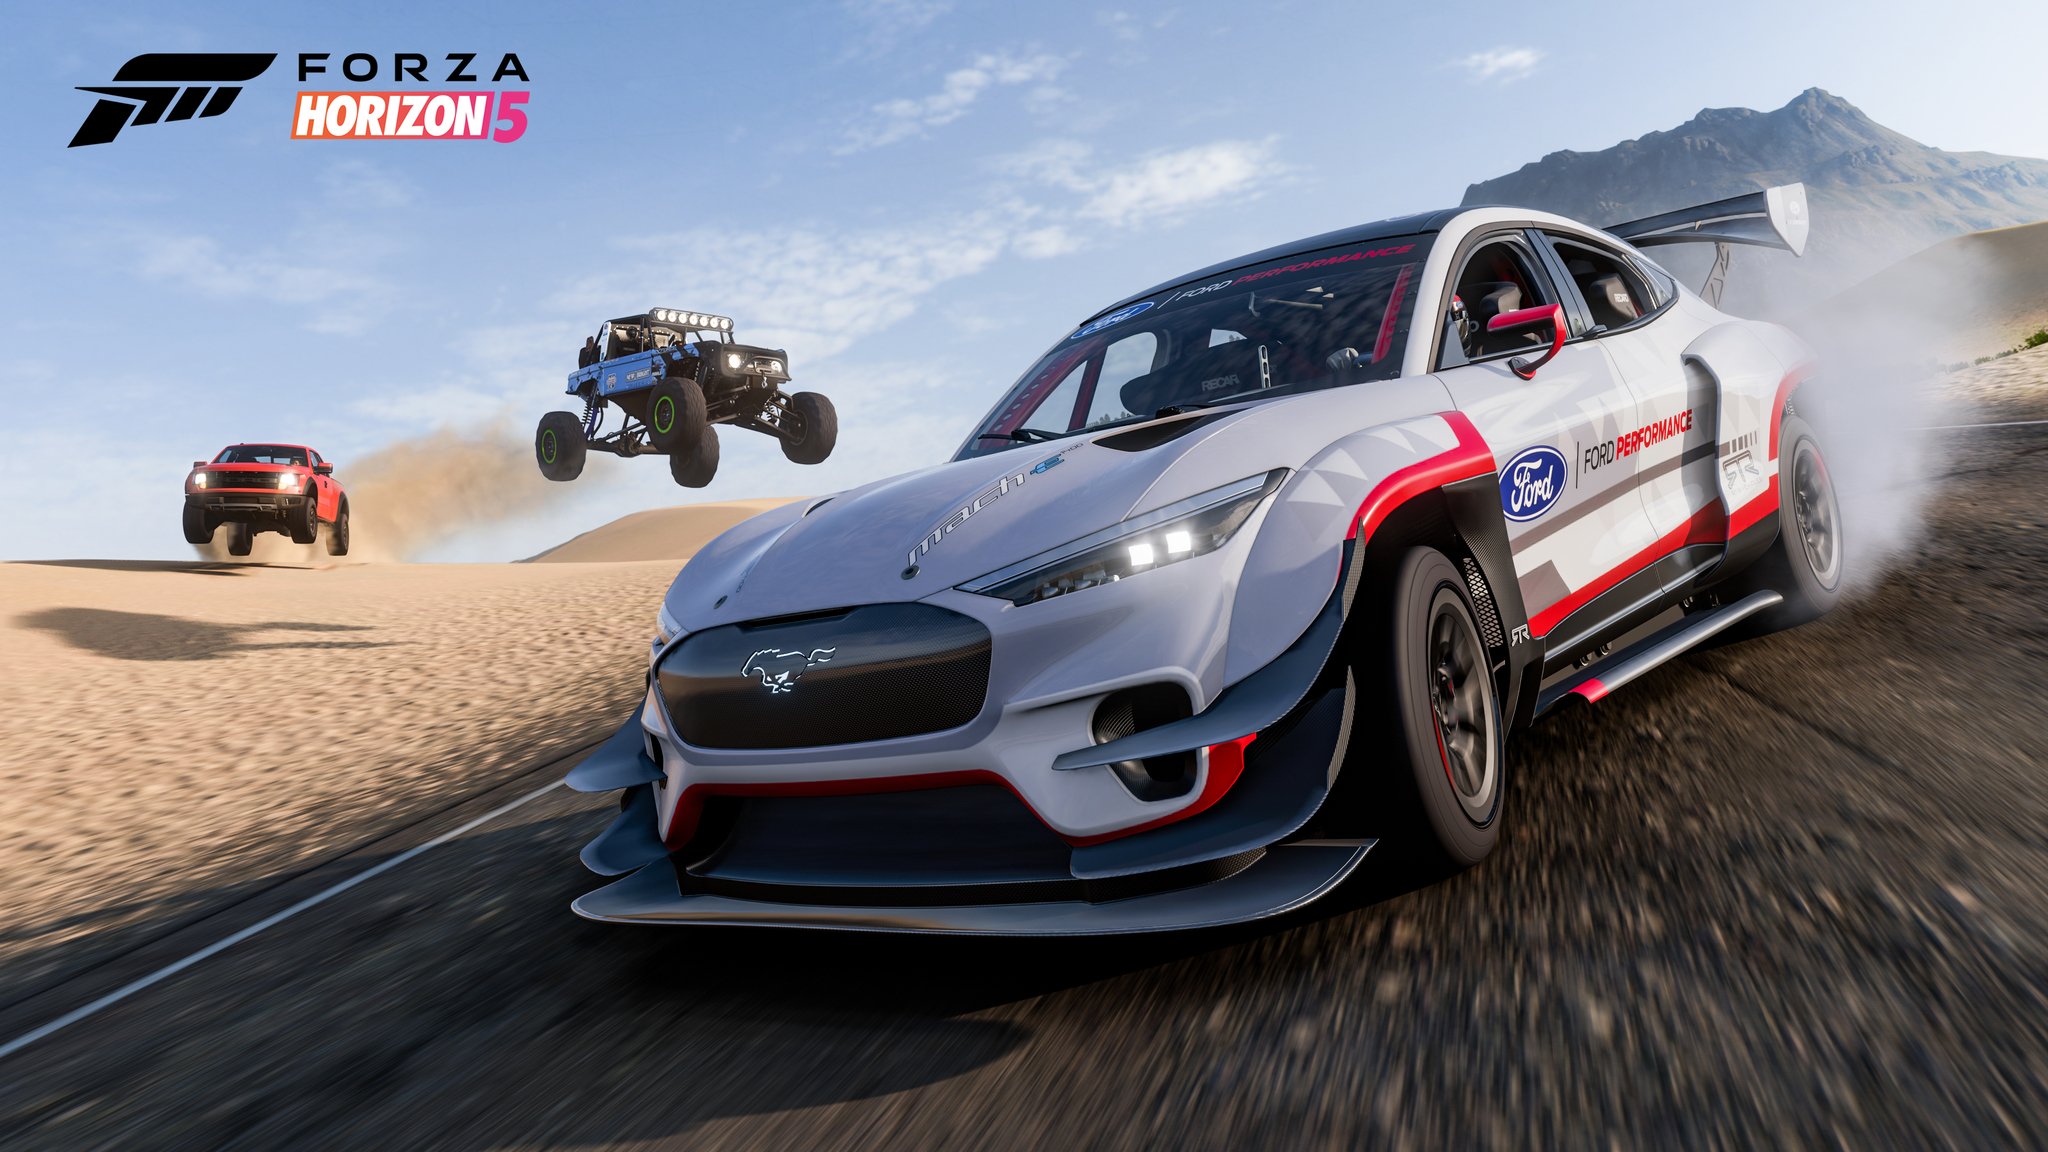 First Forza Horizon 5 expansion briefly appears on Steam: Hot